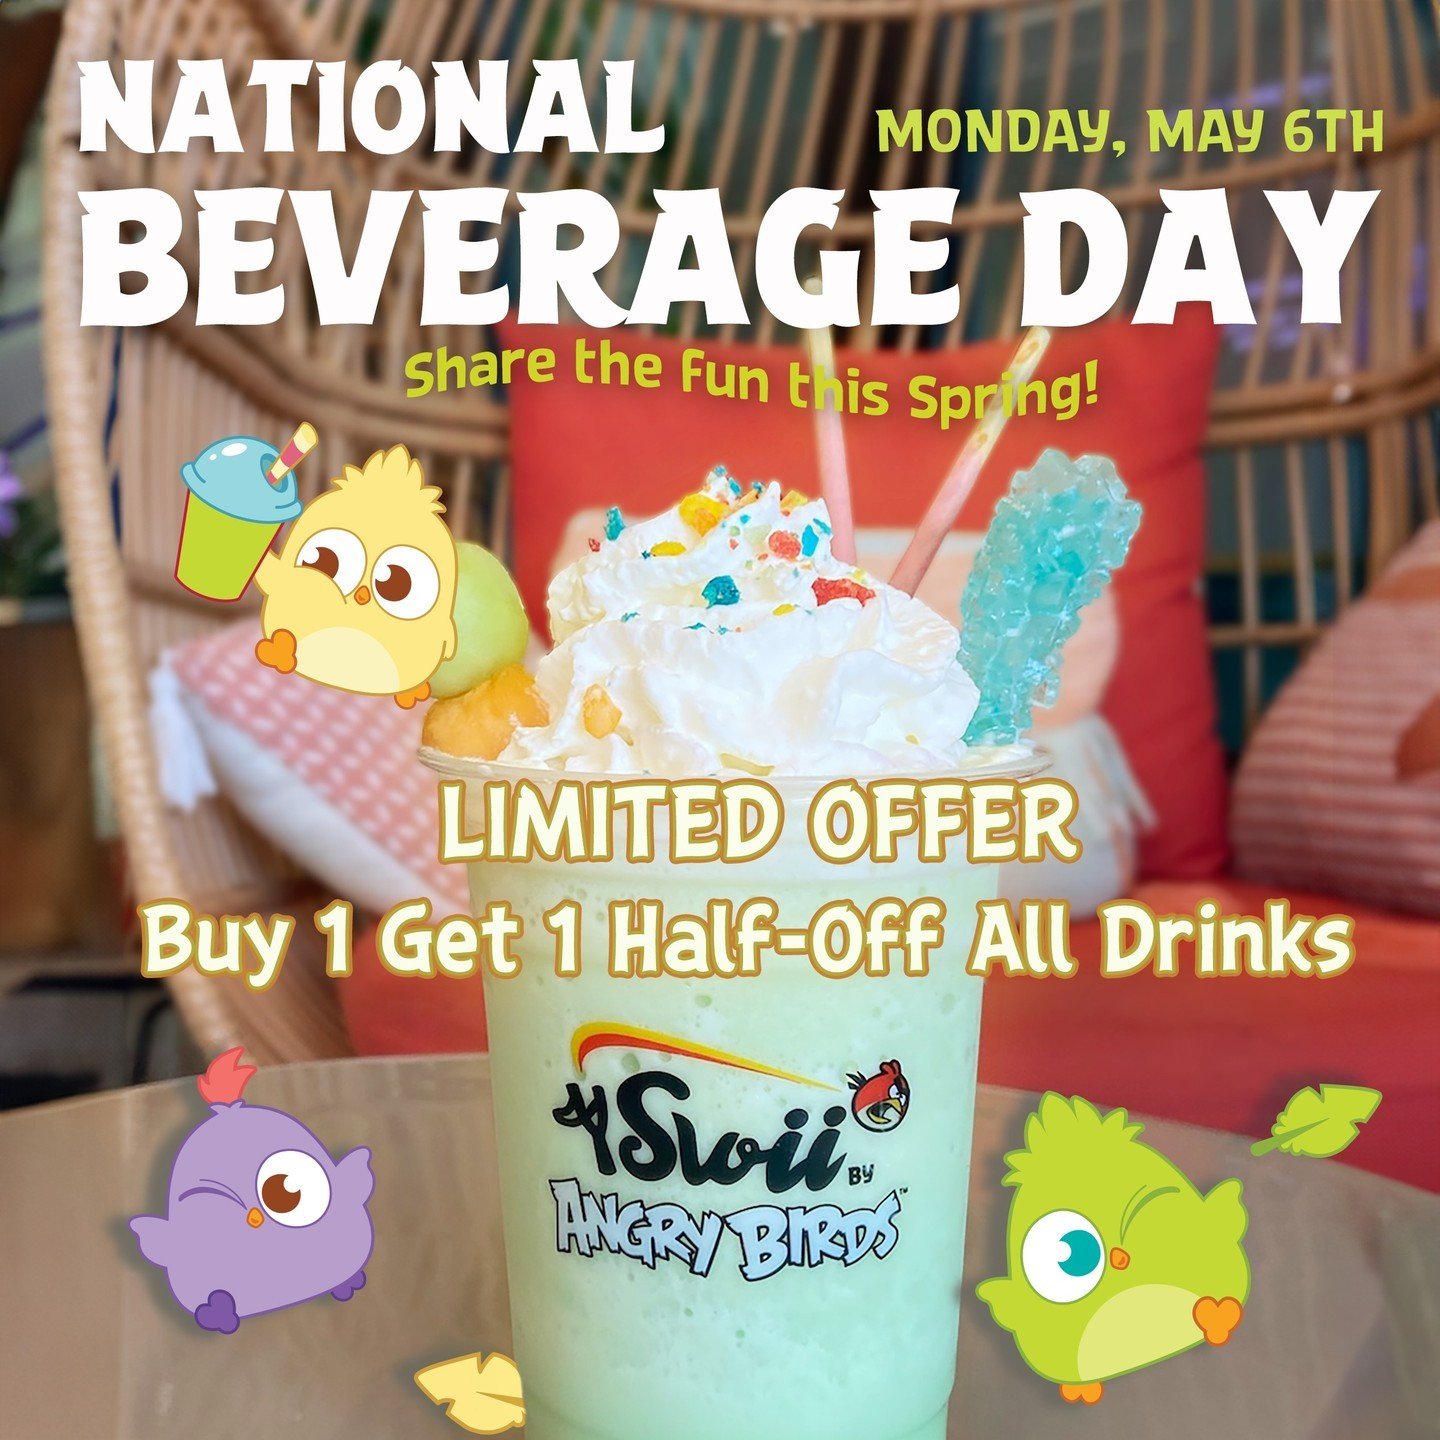 Buy 1🥤Get 1🧋Half-Off on all drinks ALL DAY next Monday, May 6th! 🥵🧊 Stay cool indoors with our specialty beverages, and share the fun with your friends on National Beverage Day! 🥰🐦

#iswiibyangrybirds #angrybirds #angrybirdsretailcafe #retailca